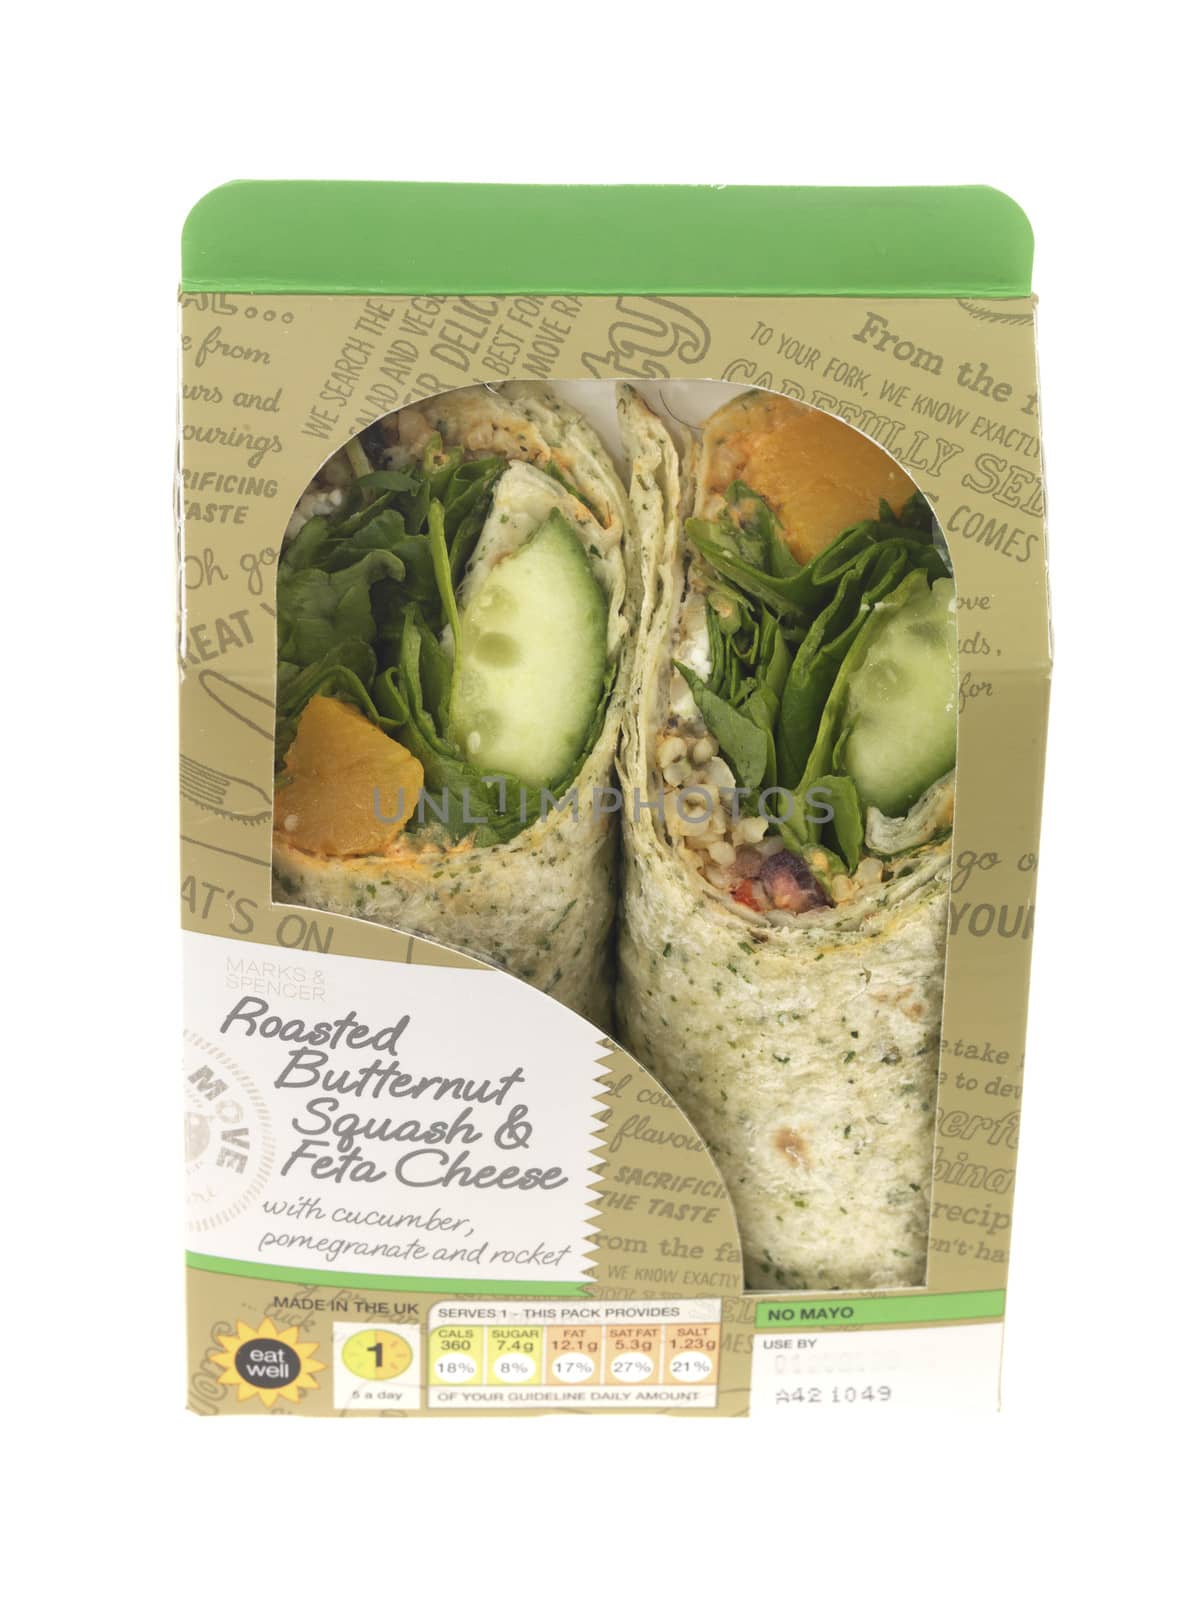 Butternut Squash and Feta Cheese Wrap by Whiteboxmedia